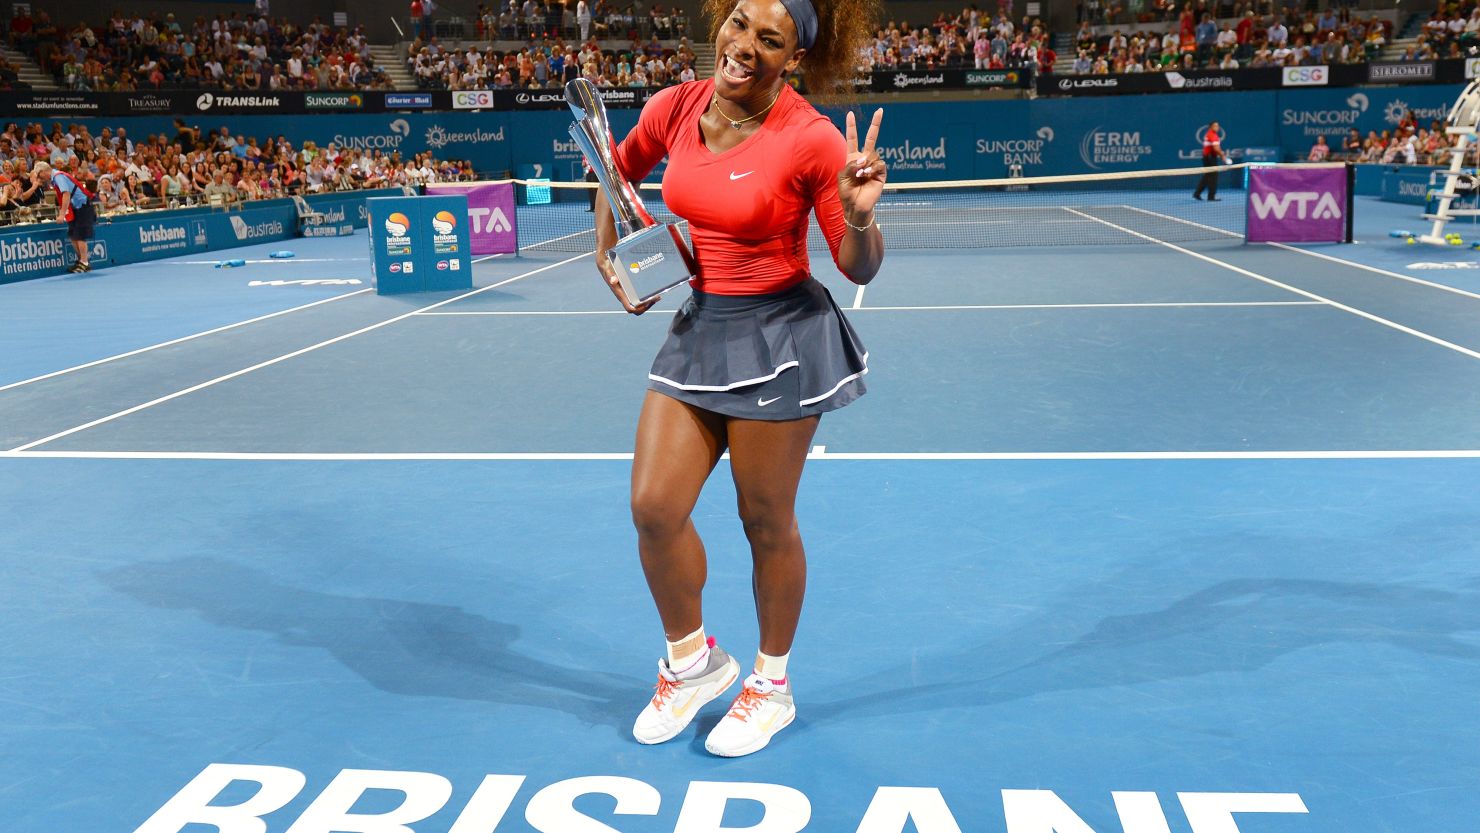 Serena Williams clearly delighted to have started 2013 by winning the Brisbane International title.